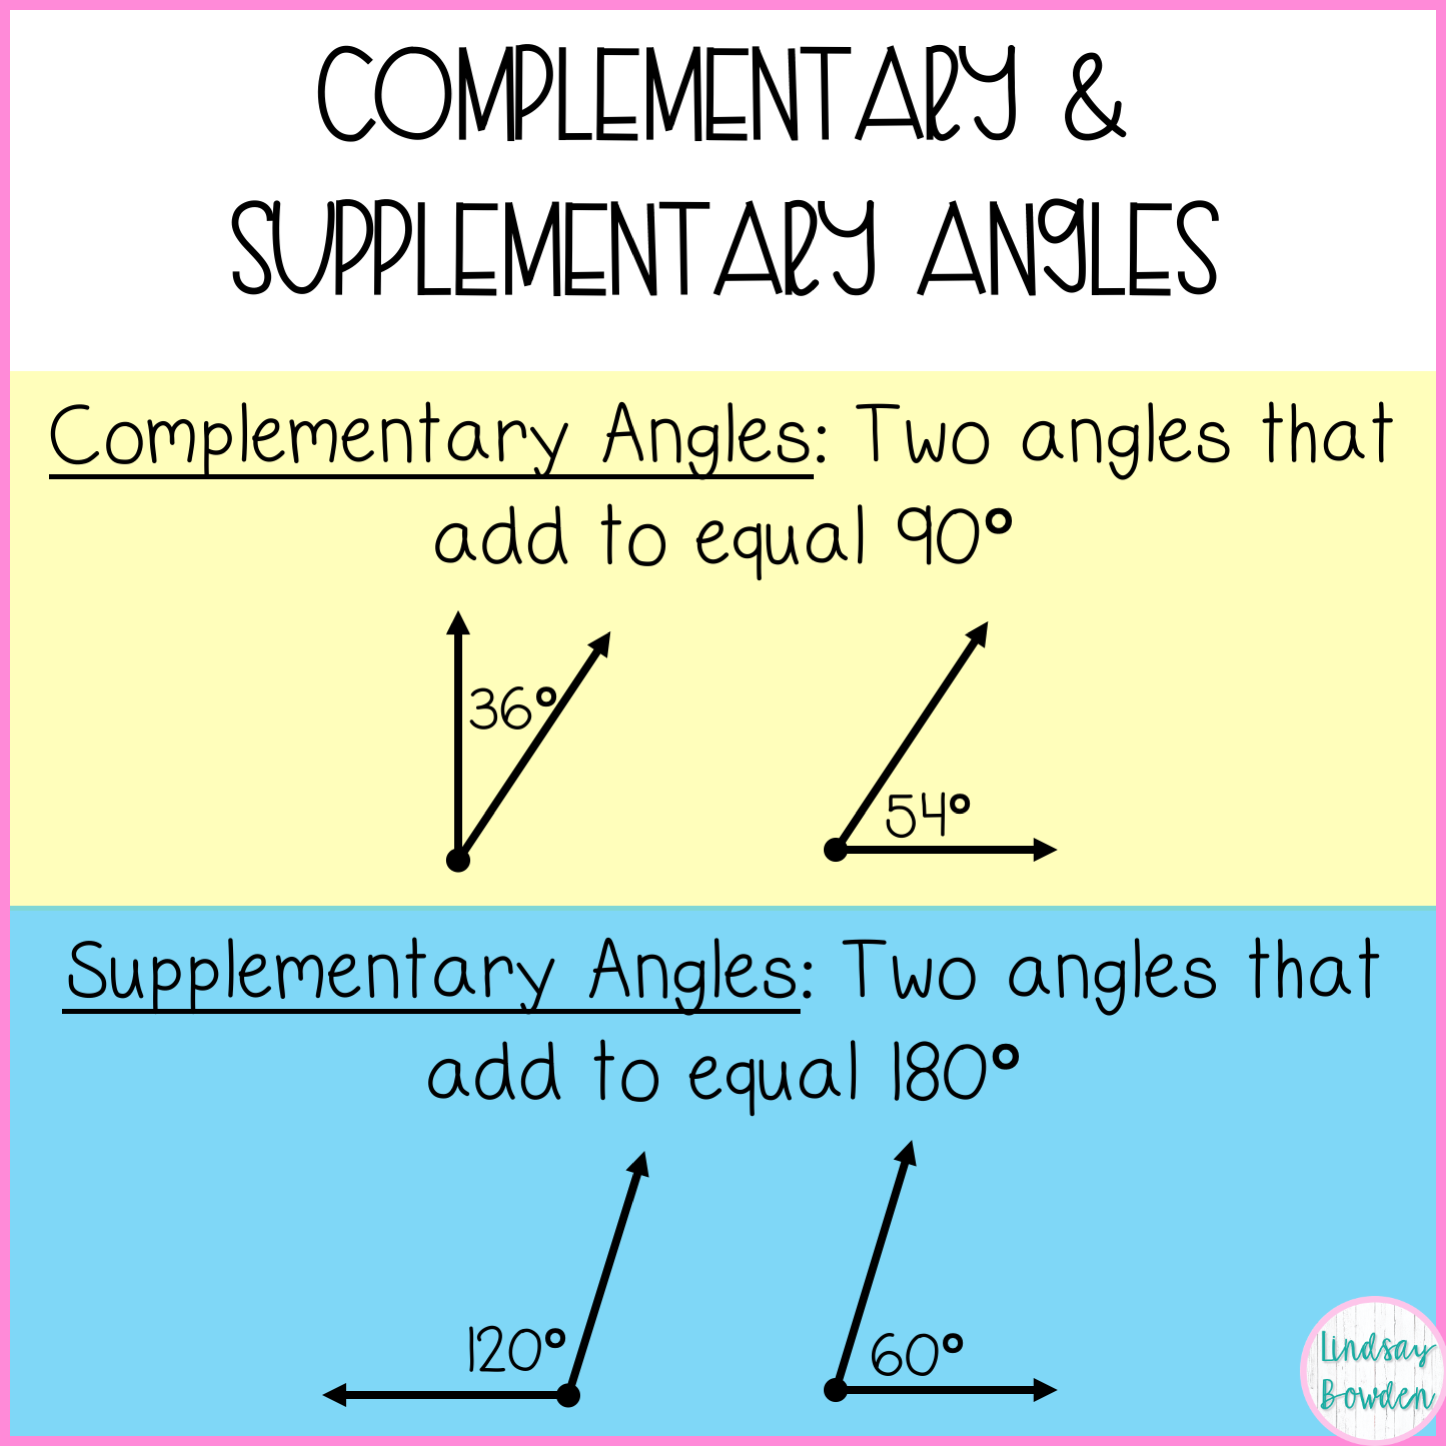 Complementary and Supplementary Angles - Lindsay Bowden